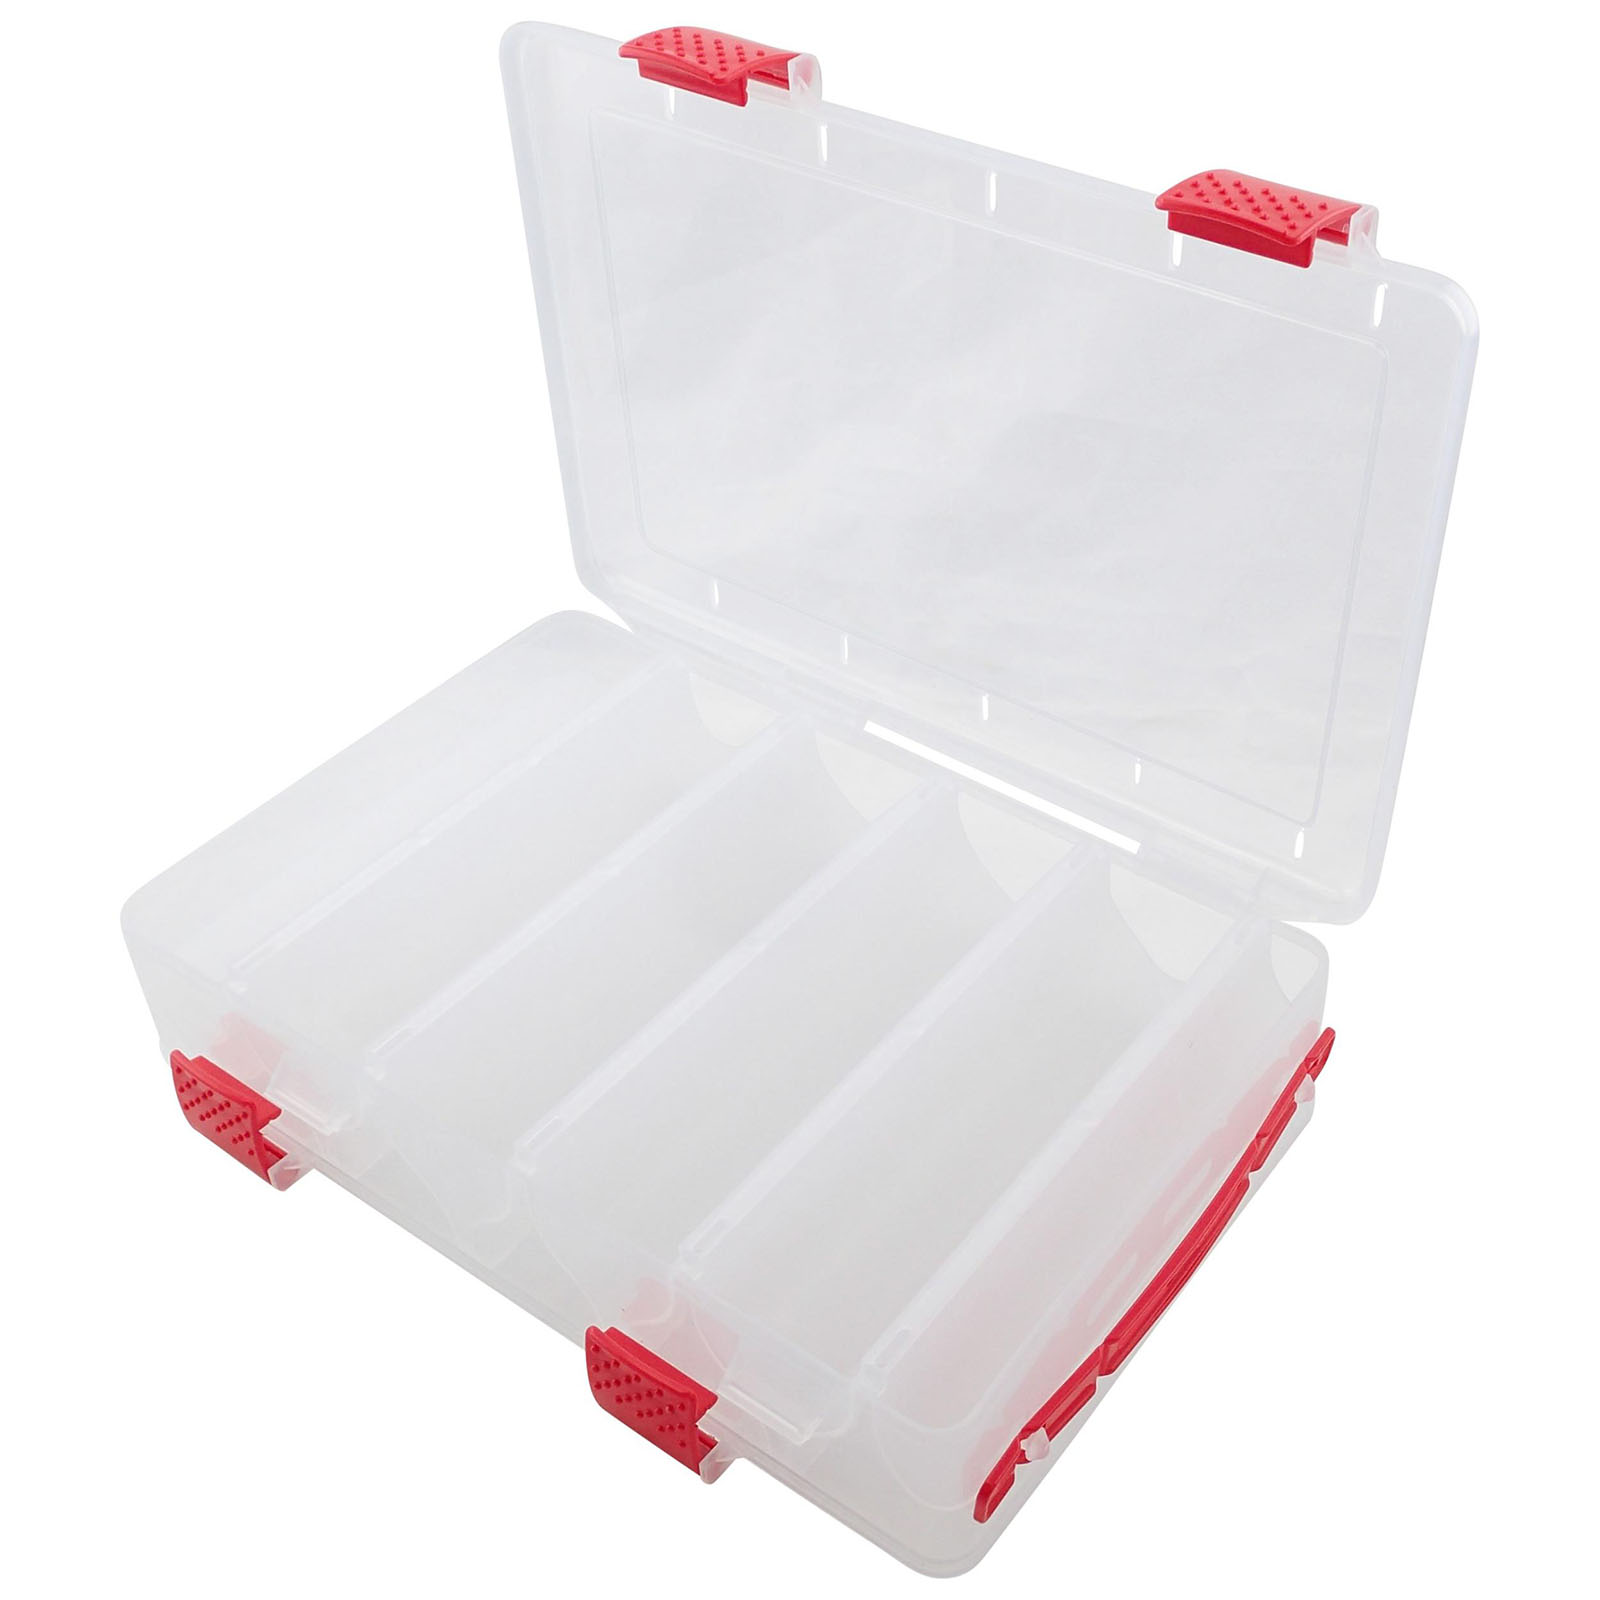 Amish Outfitters Double-Sided Crankbait Tackle Box